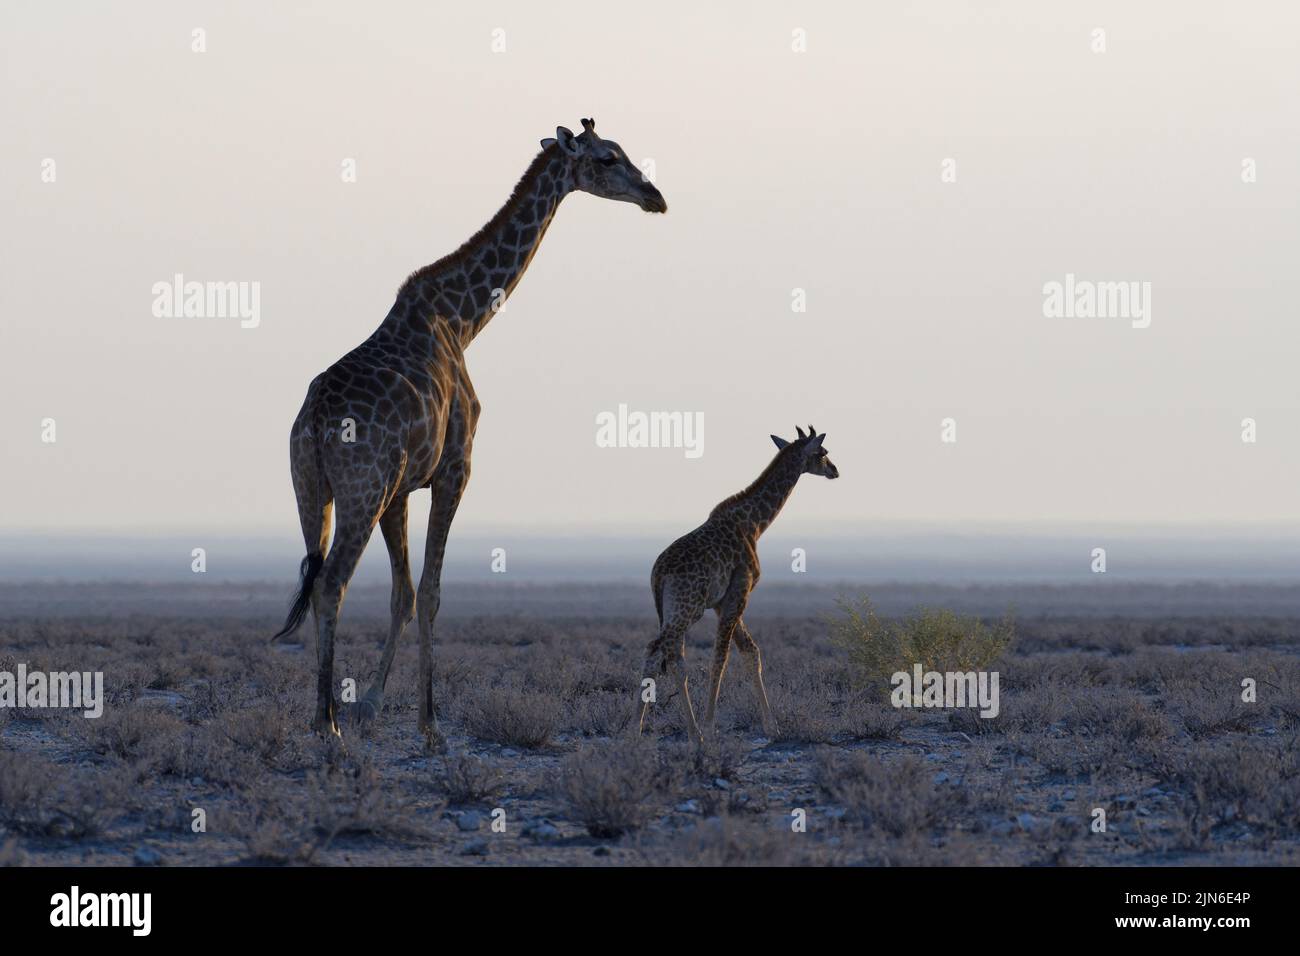 Angolan giraffes (Giraffa camelopardalis angolensis), adult with young, walking in dry grassland, morning light, Etosha National Park, Namibia, Africa Stock Photo